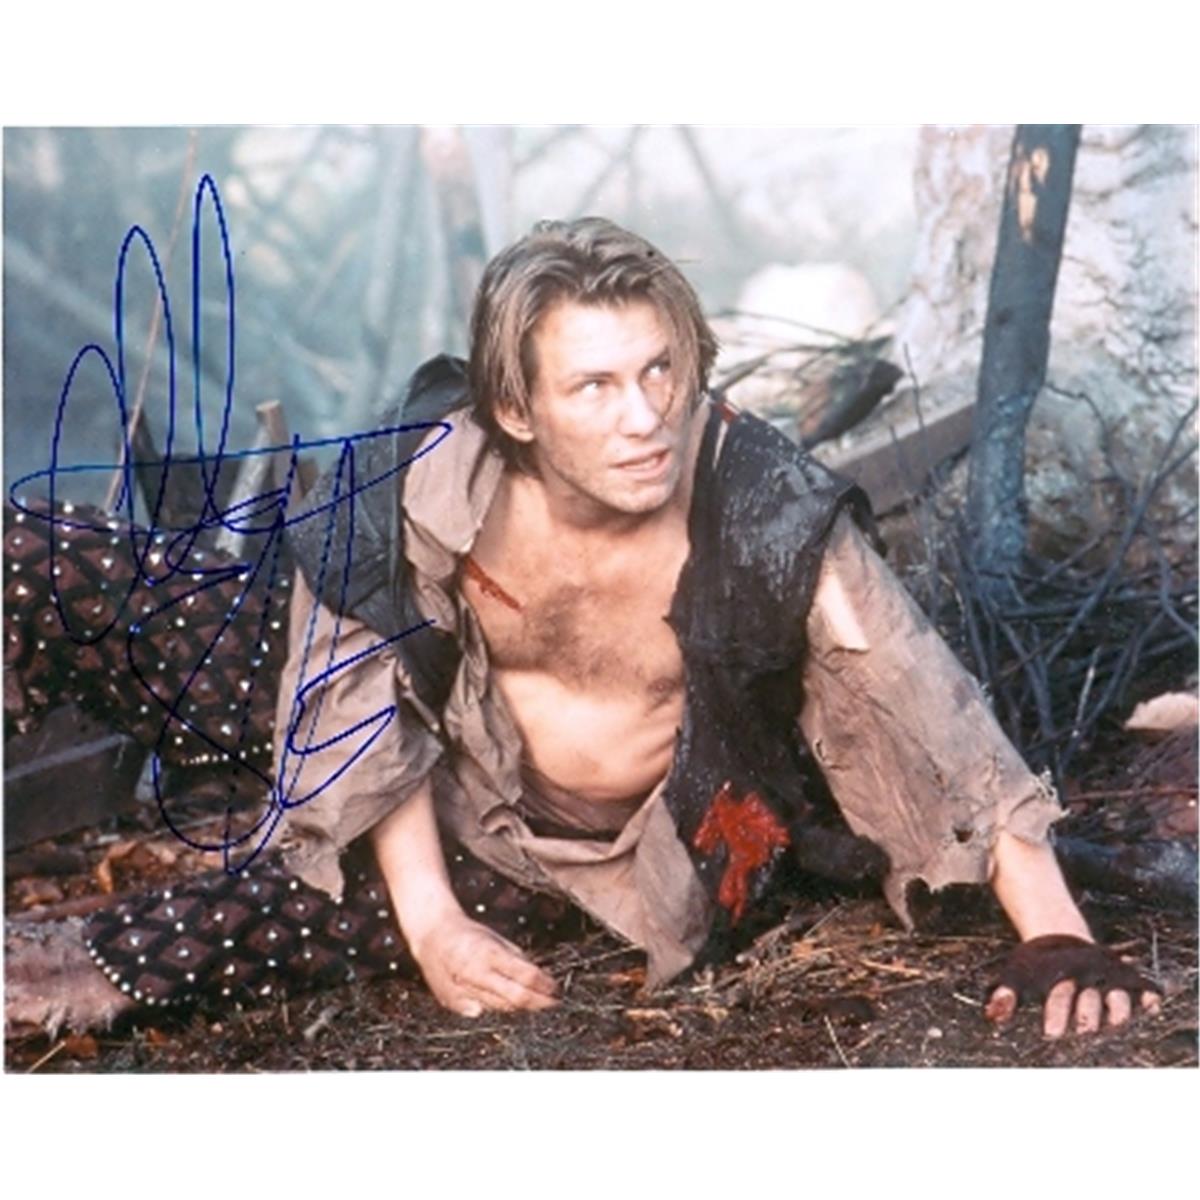 378007 8 x 10 in. Christian Slater Autographed Photo - Robin Hood Movie as Will Scarlett Image No.3 -  Autograph Warehouse